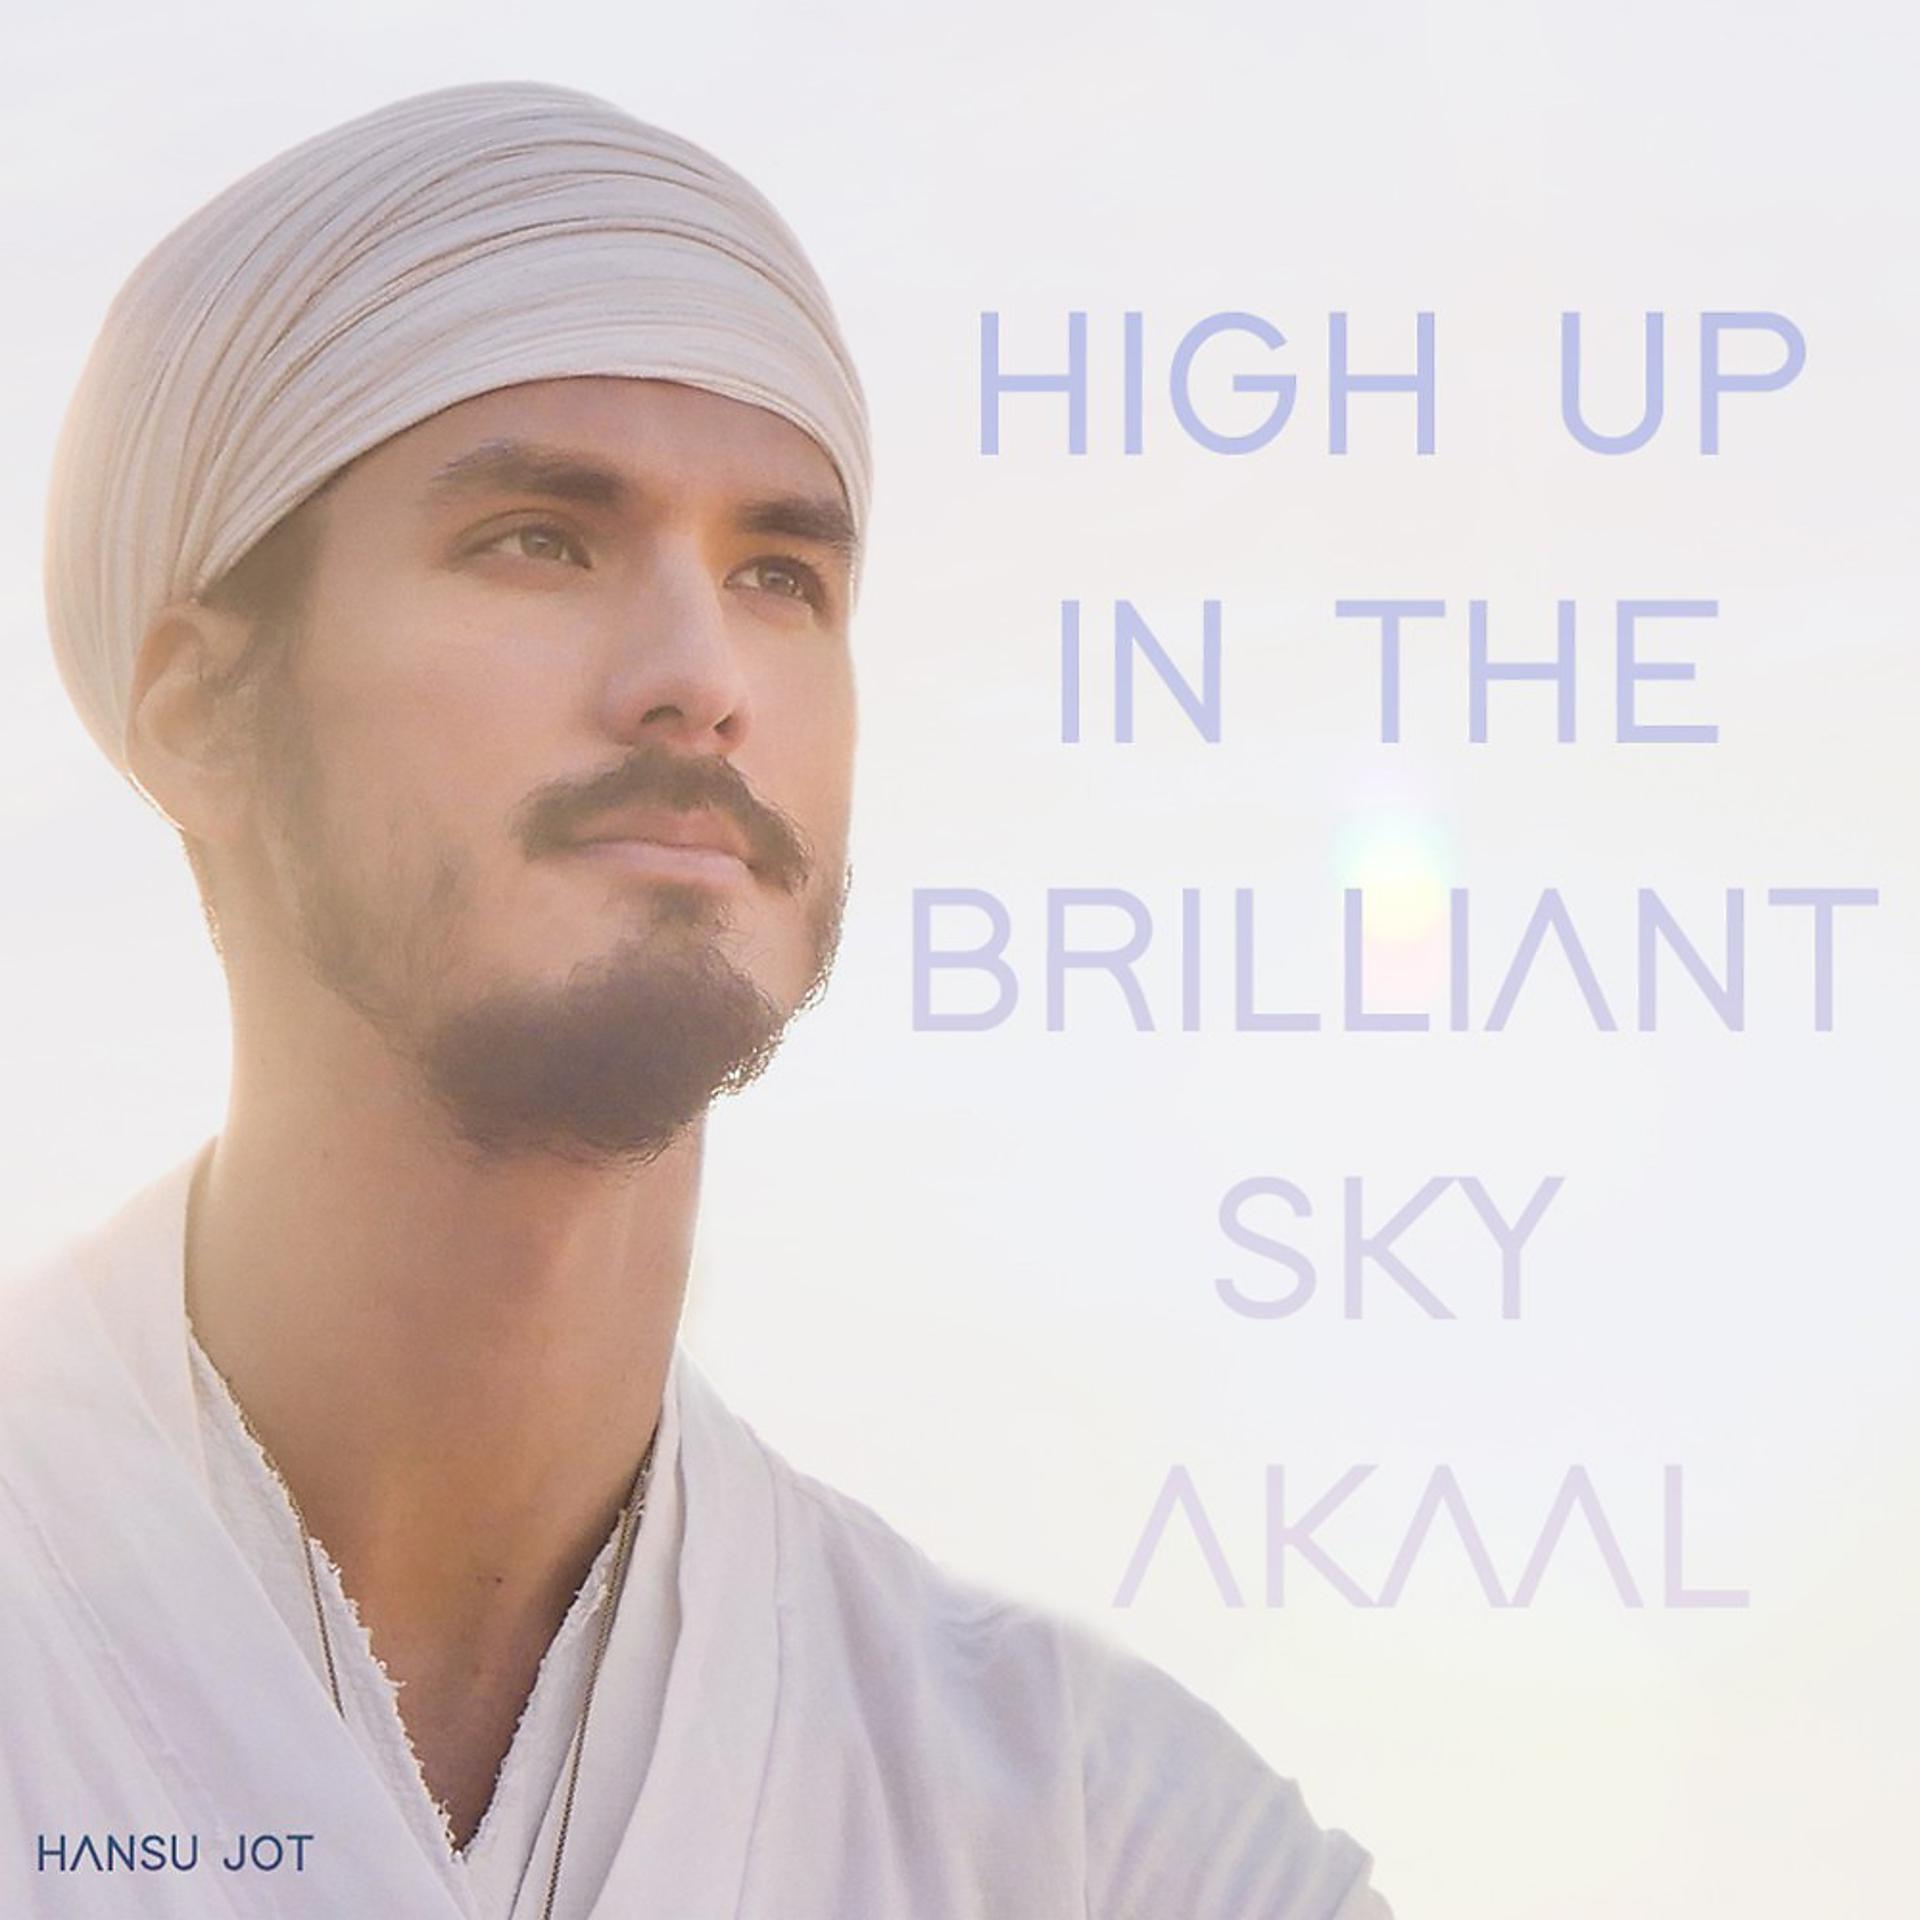 Постер альбома High up in the Brilliant Sky (Akaal)